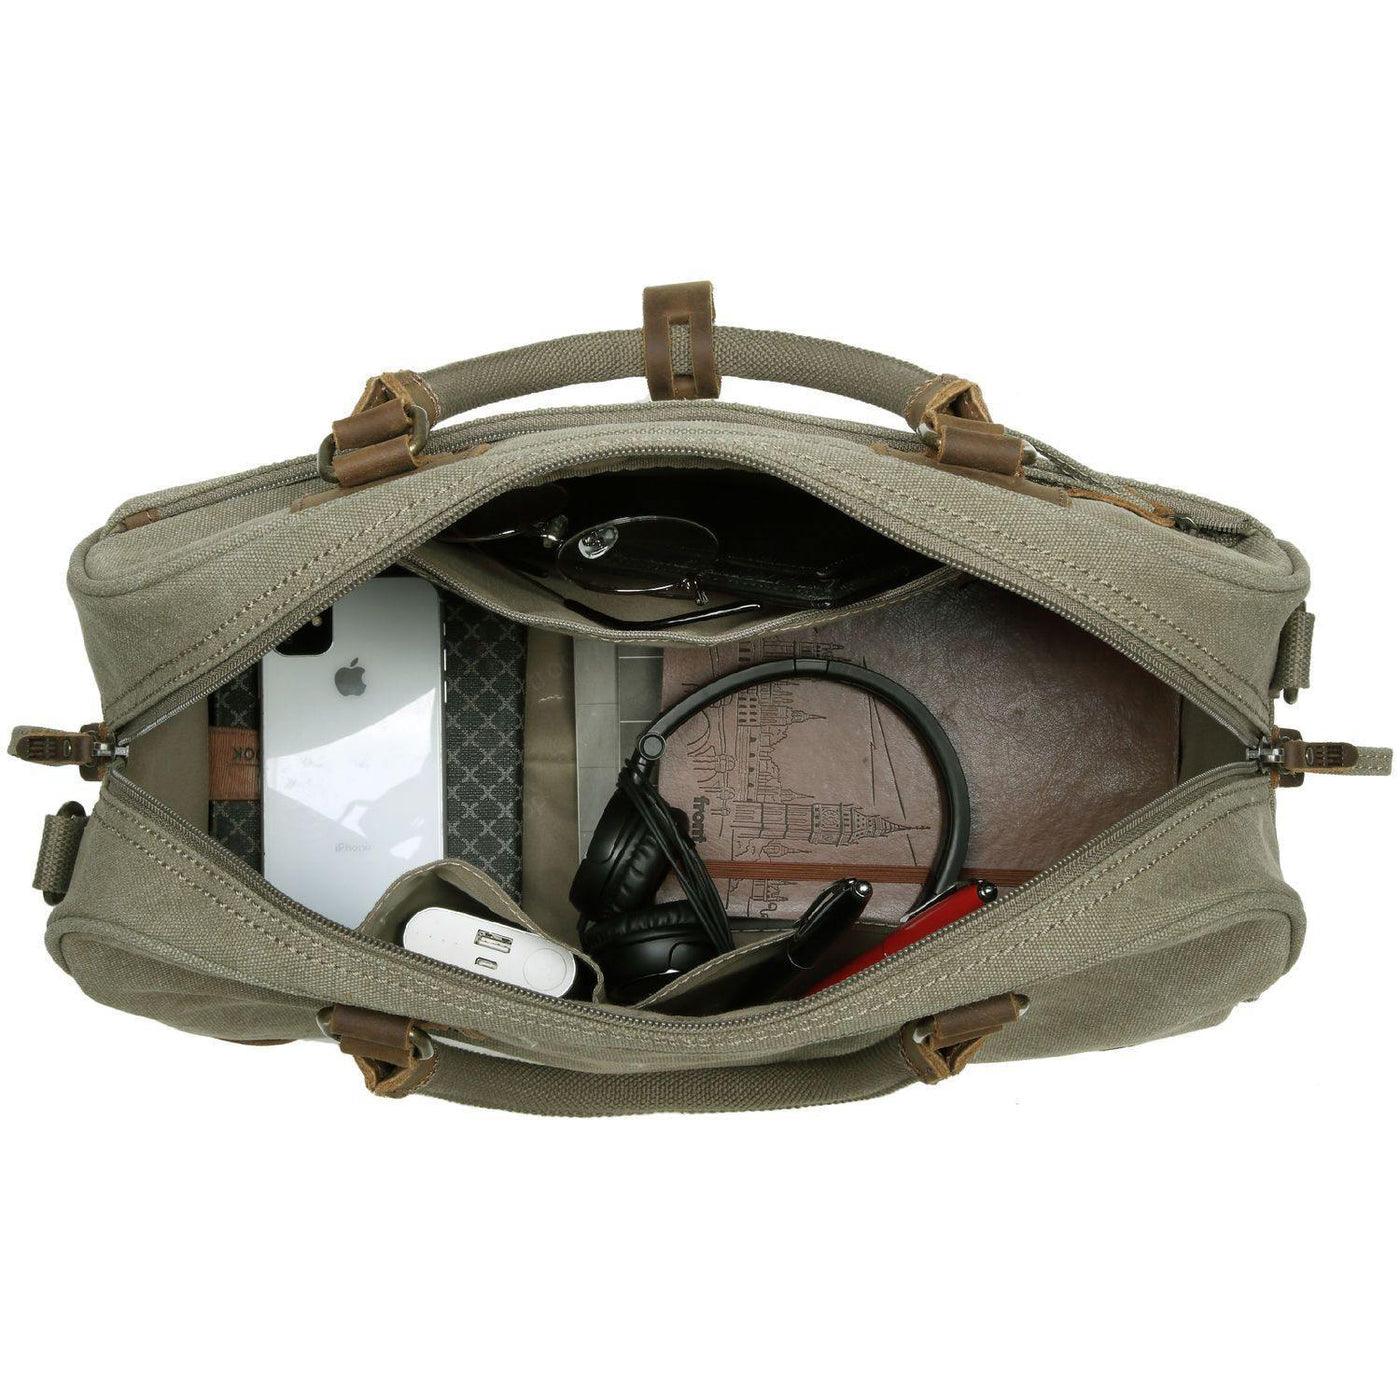 CLASSIC CANVAS HOLDALL - TRP0262 - KHAKI - RUTHERFORD & Co